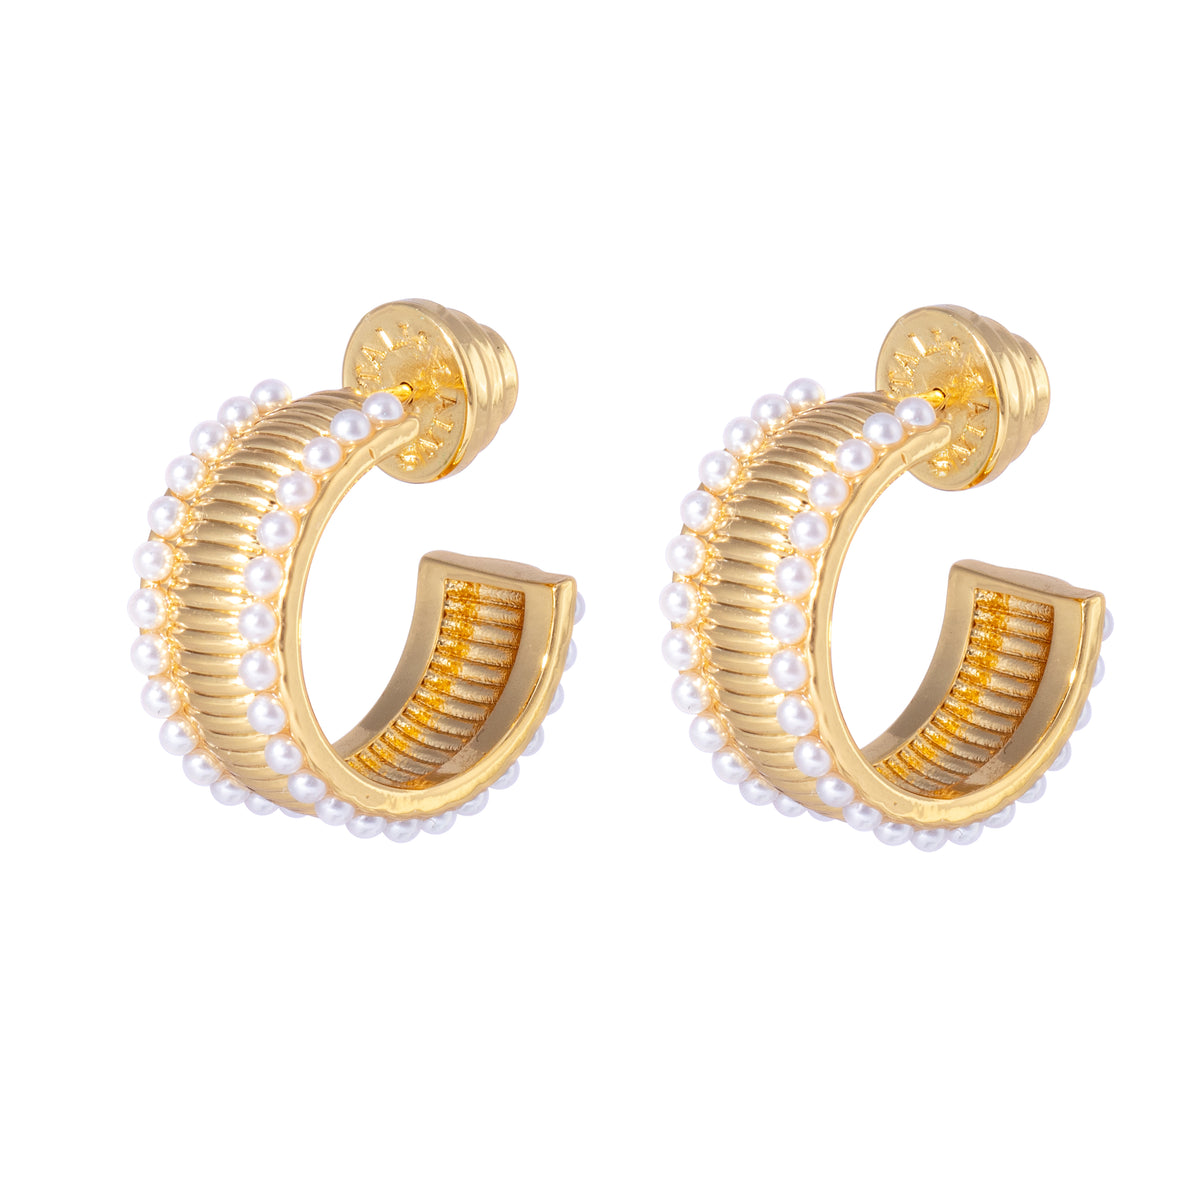 Gold ridged hoops framed by rows of small pearls and secured with a butterfly